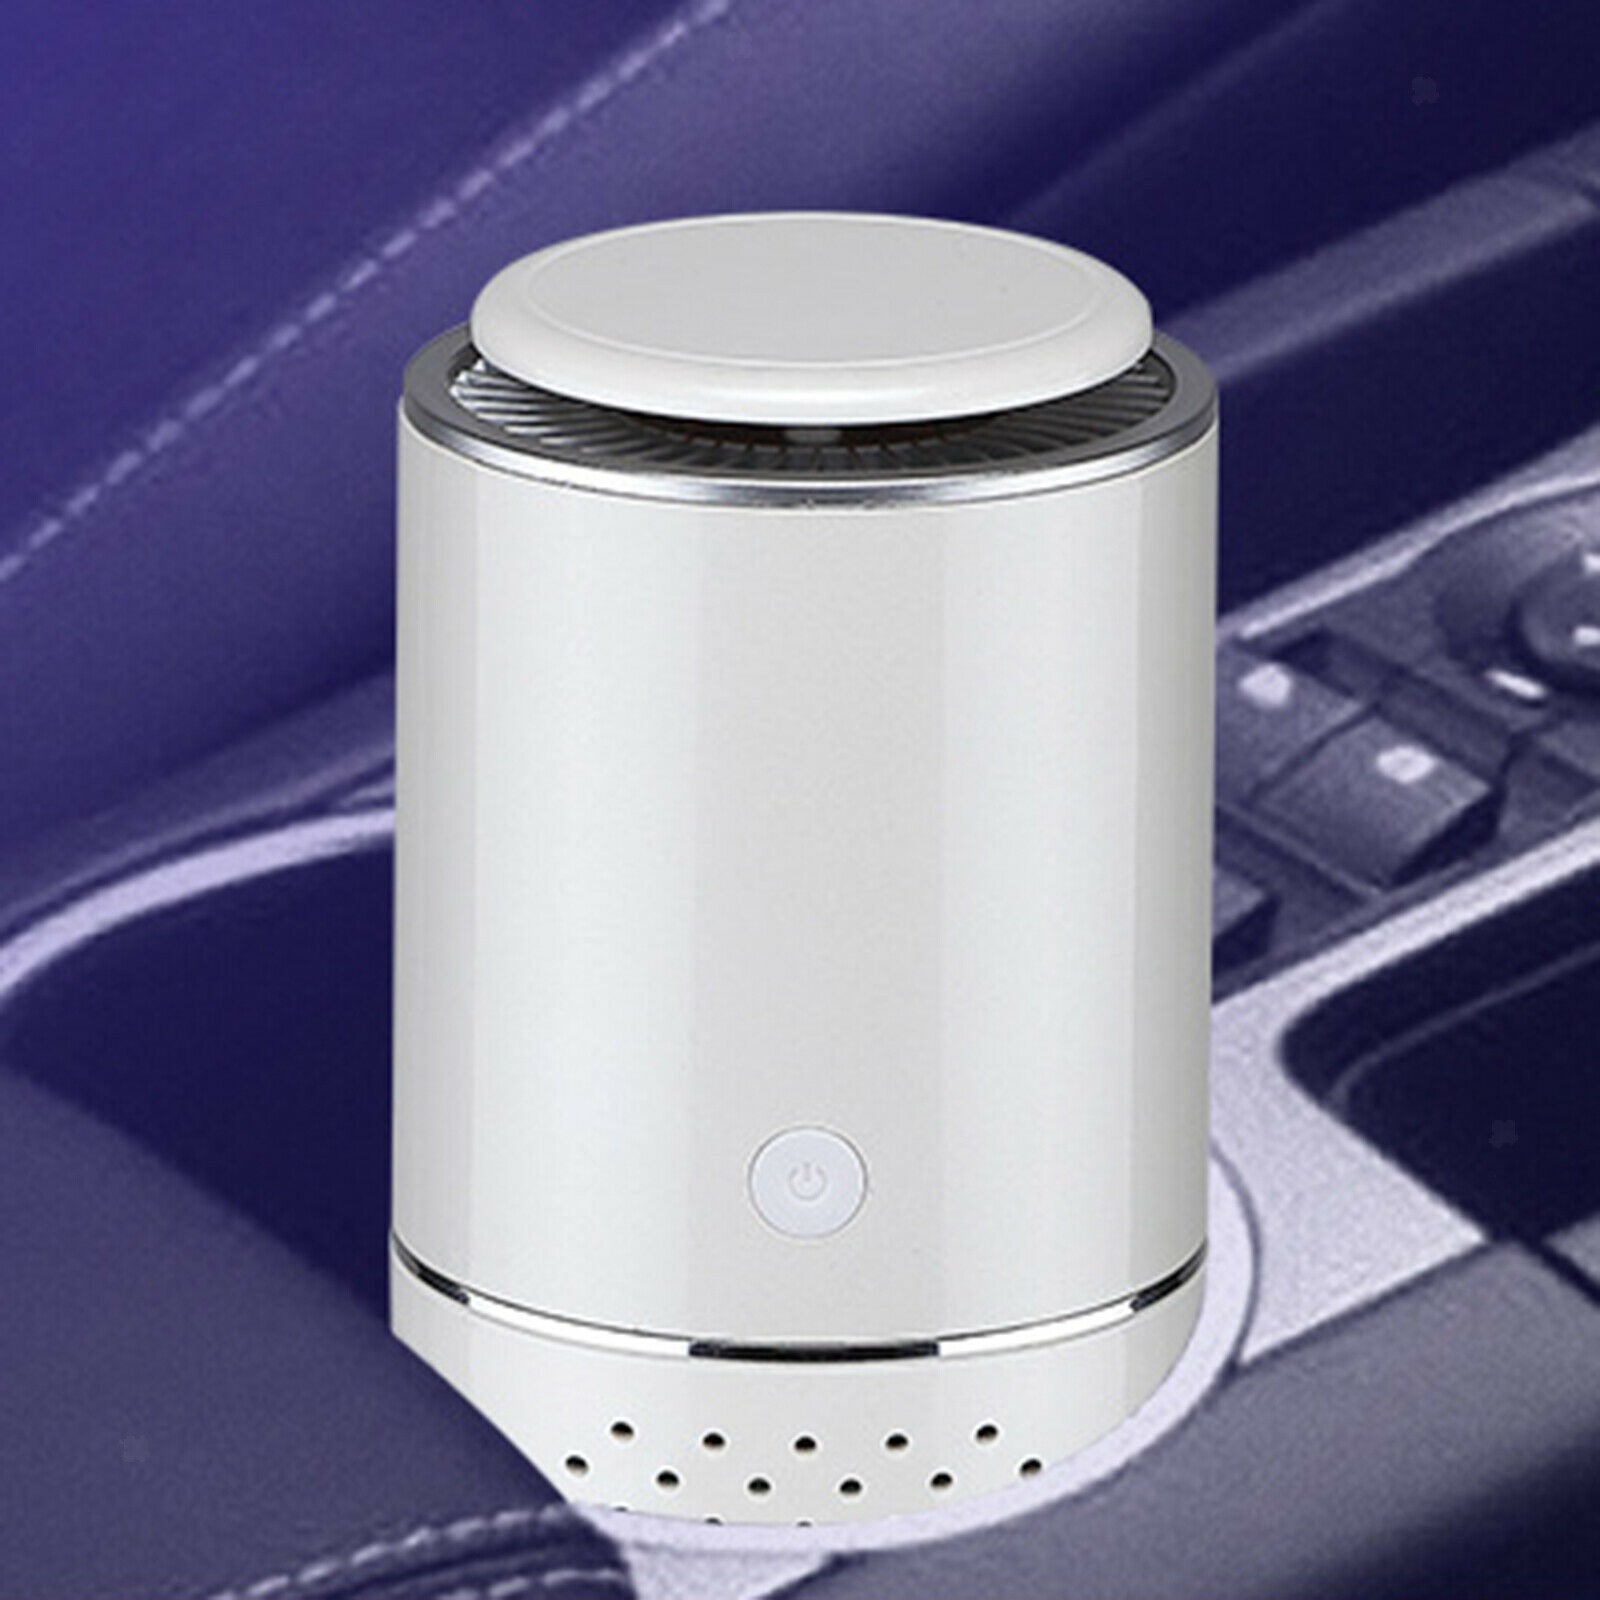 Portable Mini Air Purifier for Car Home Office Air Cleaner for Pollen Smoke